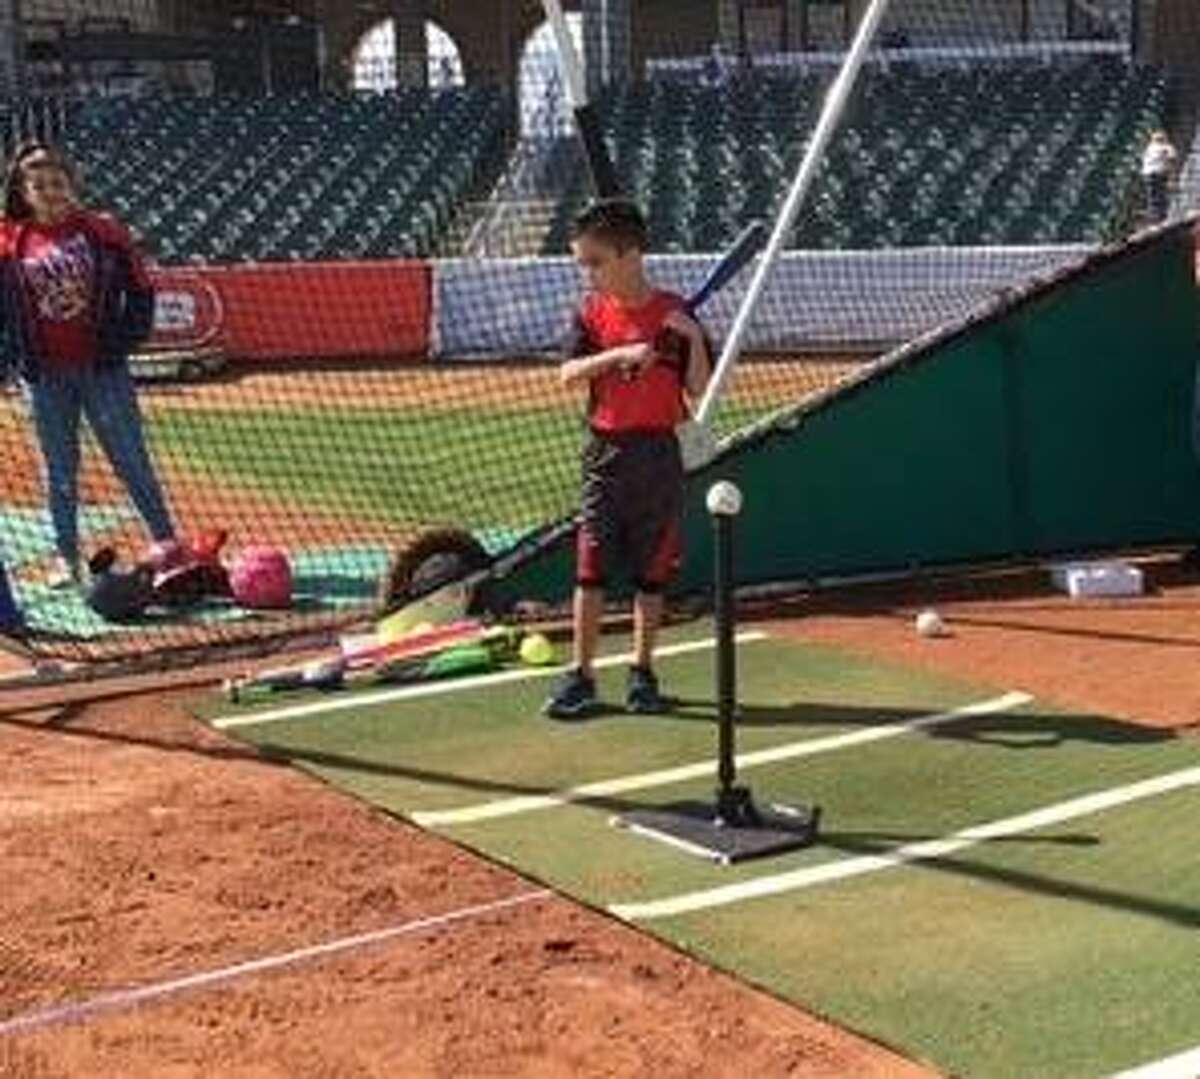 Locals competed in the MLB Pitch, Hit & Run Competition on Saturday at Uni-Trade Stadium looking to advance to the sectional competition in Corpus Christi on May 20.